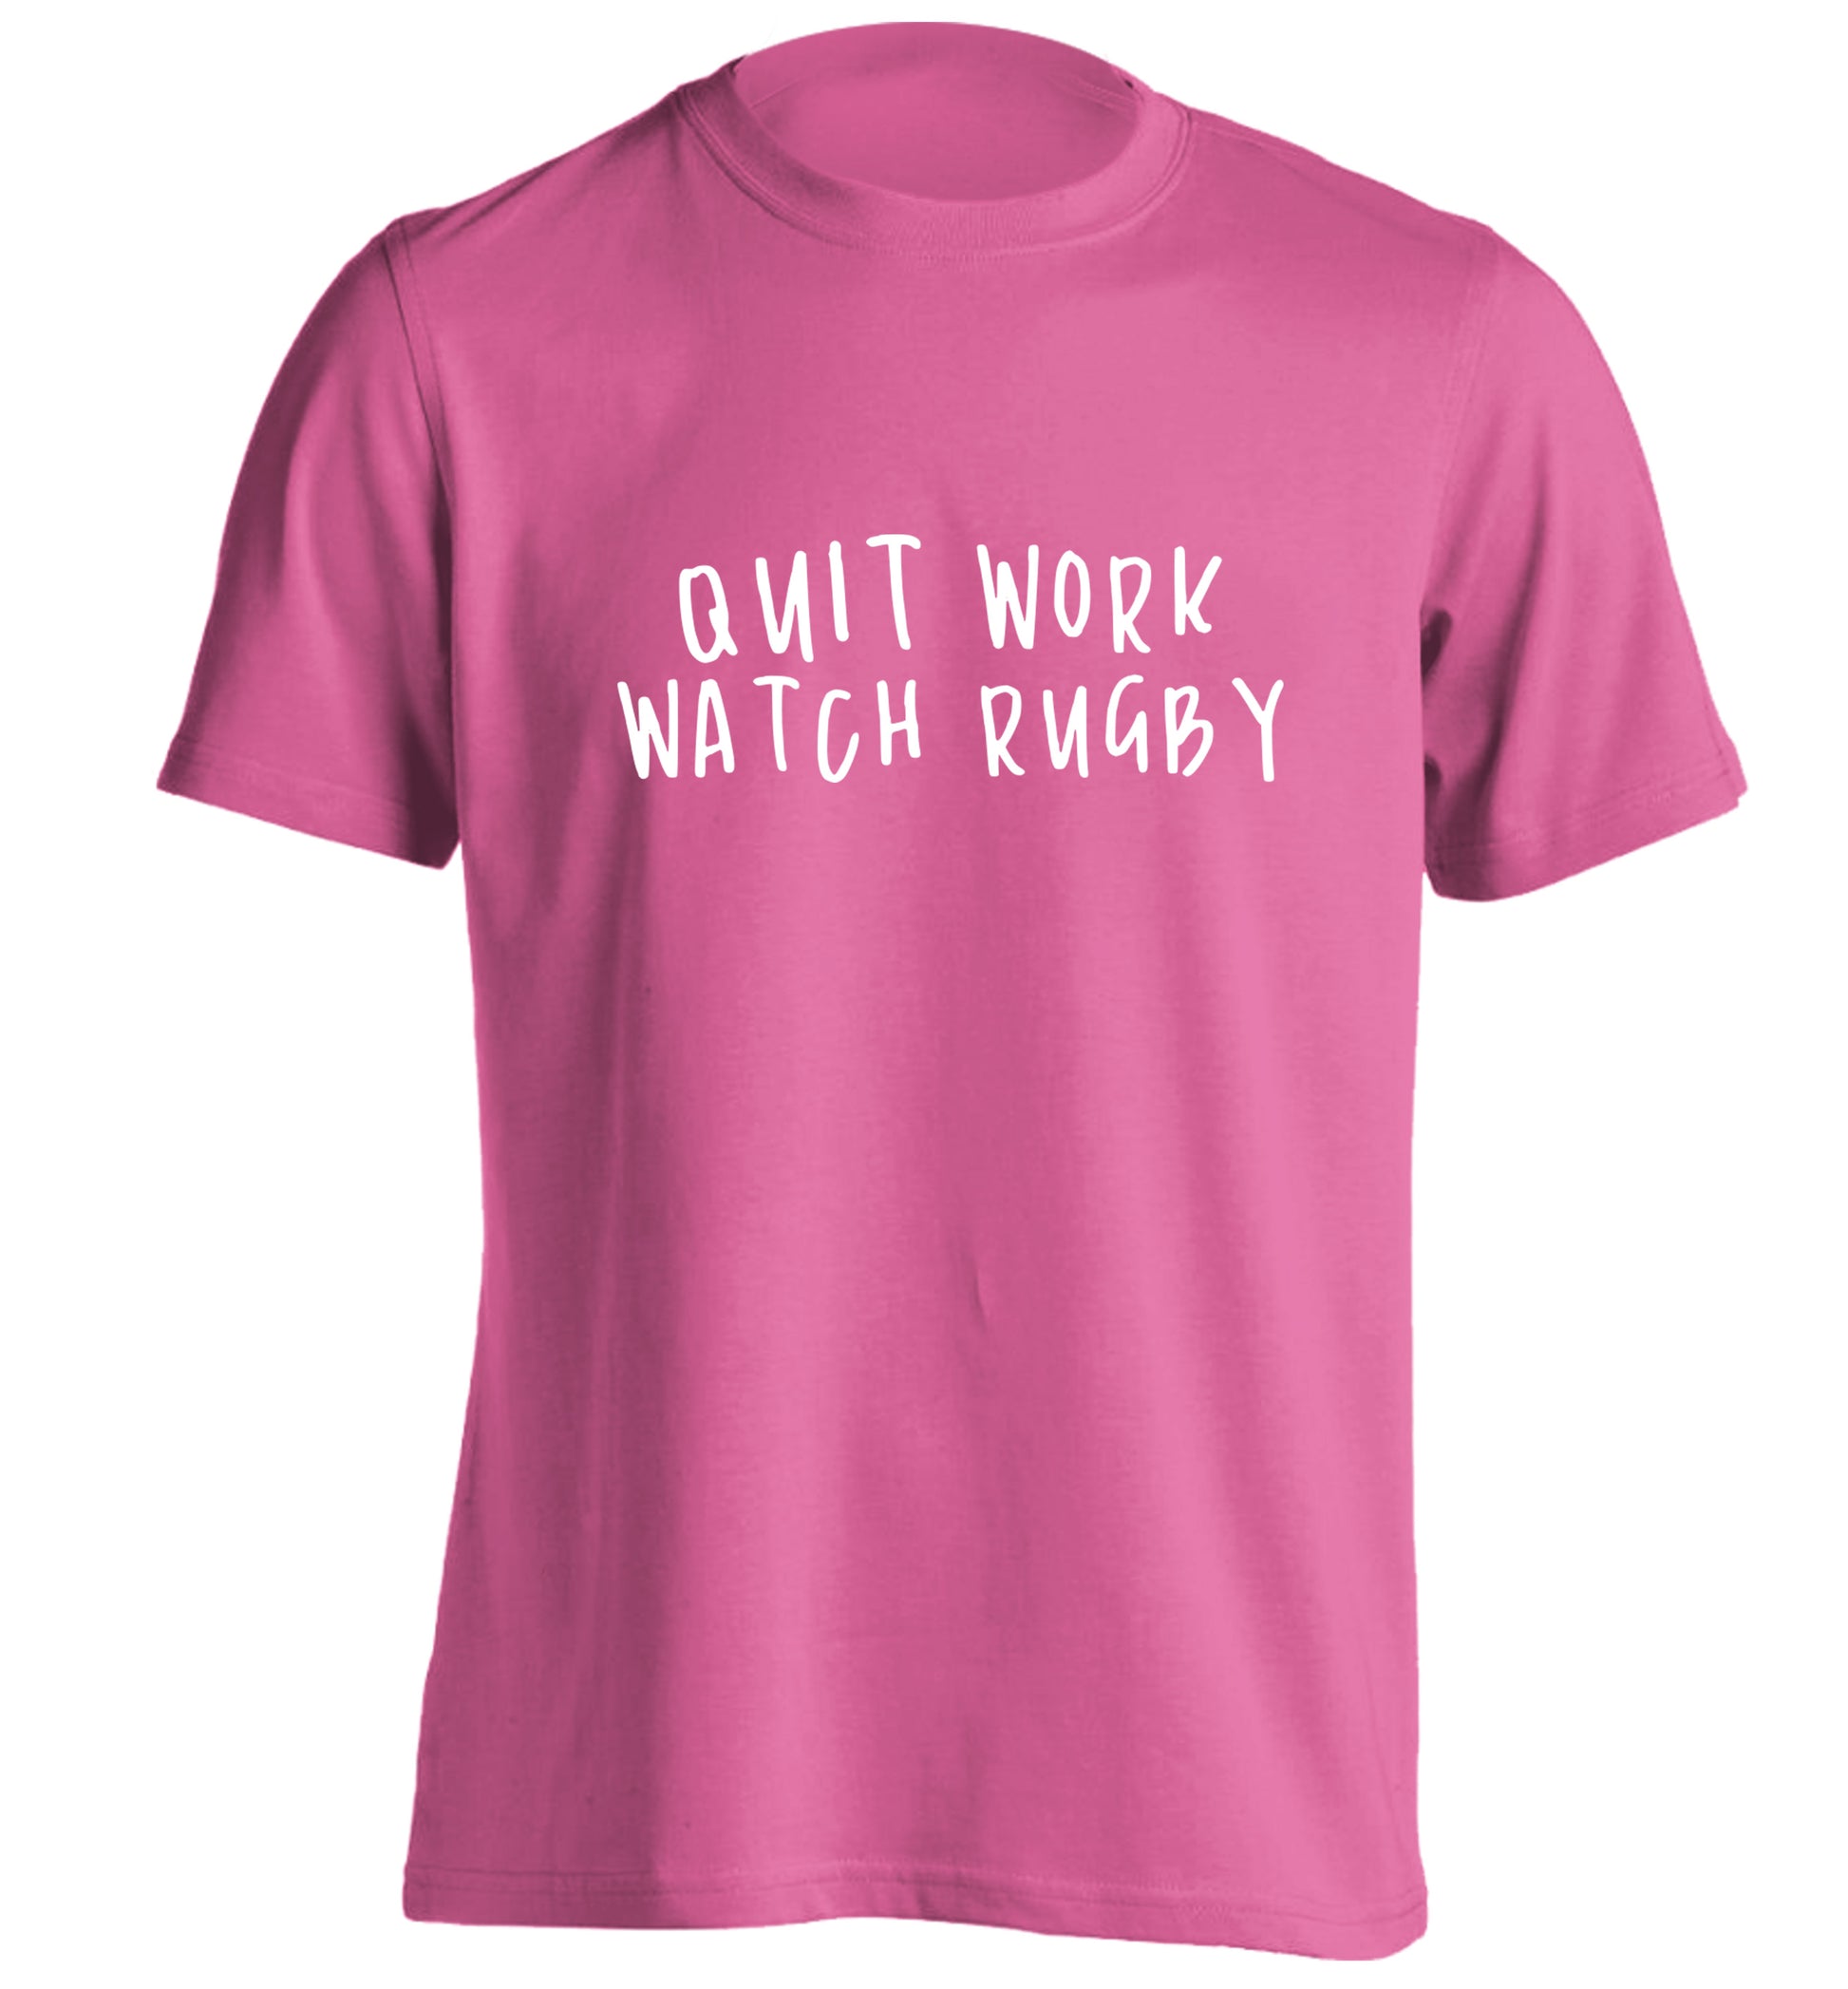 Quit work watch rugby adults unisex pink Tshirt 2XL